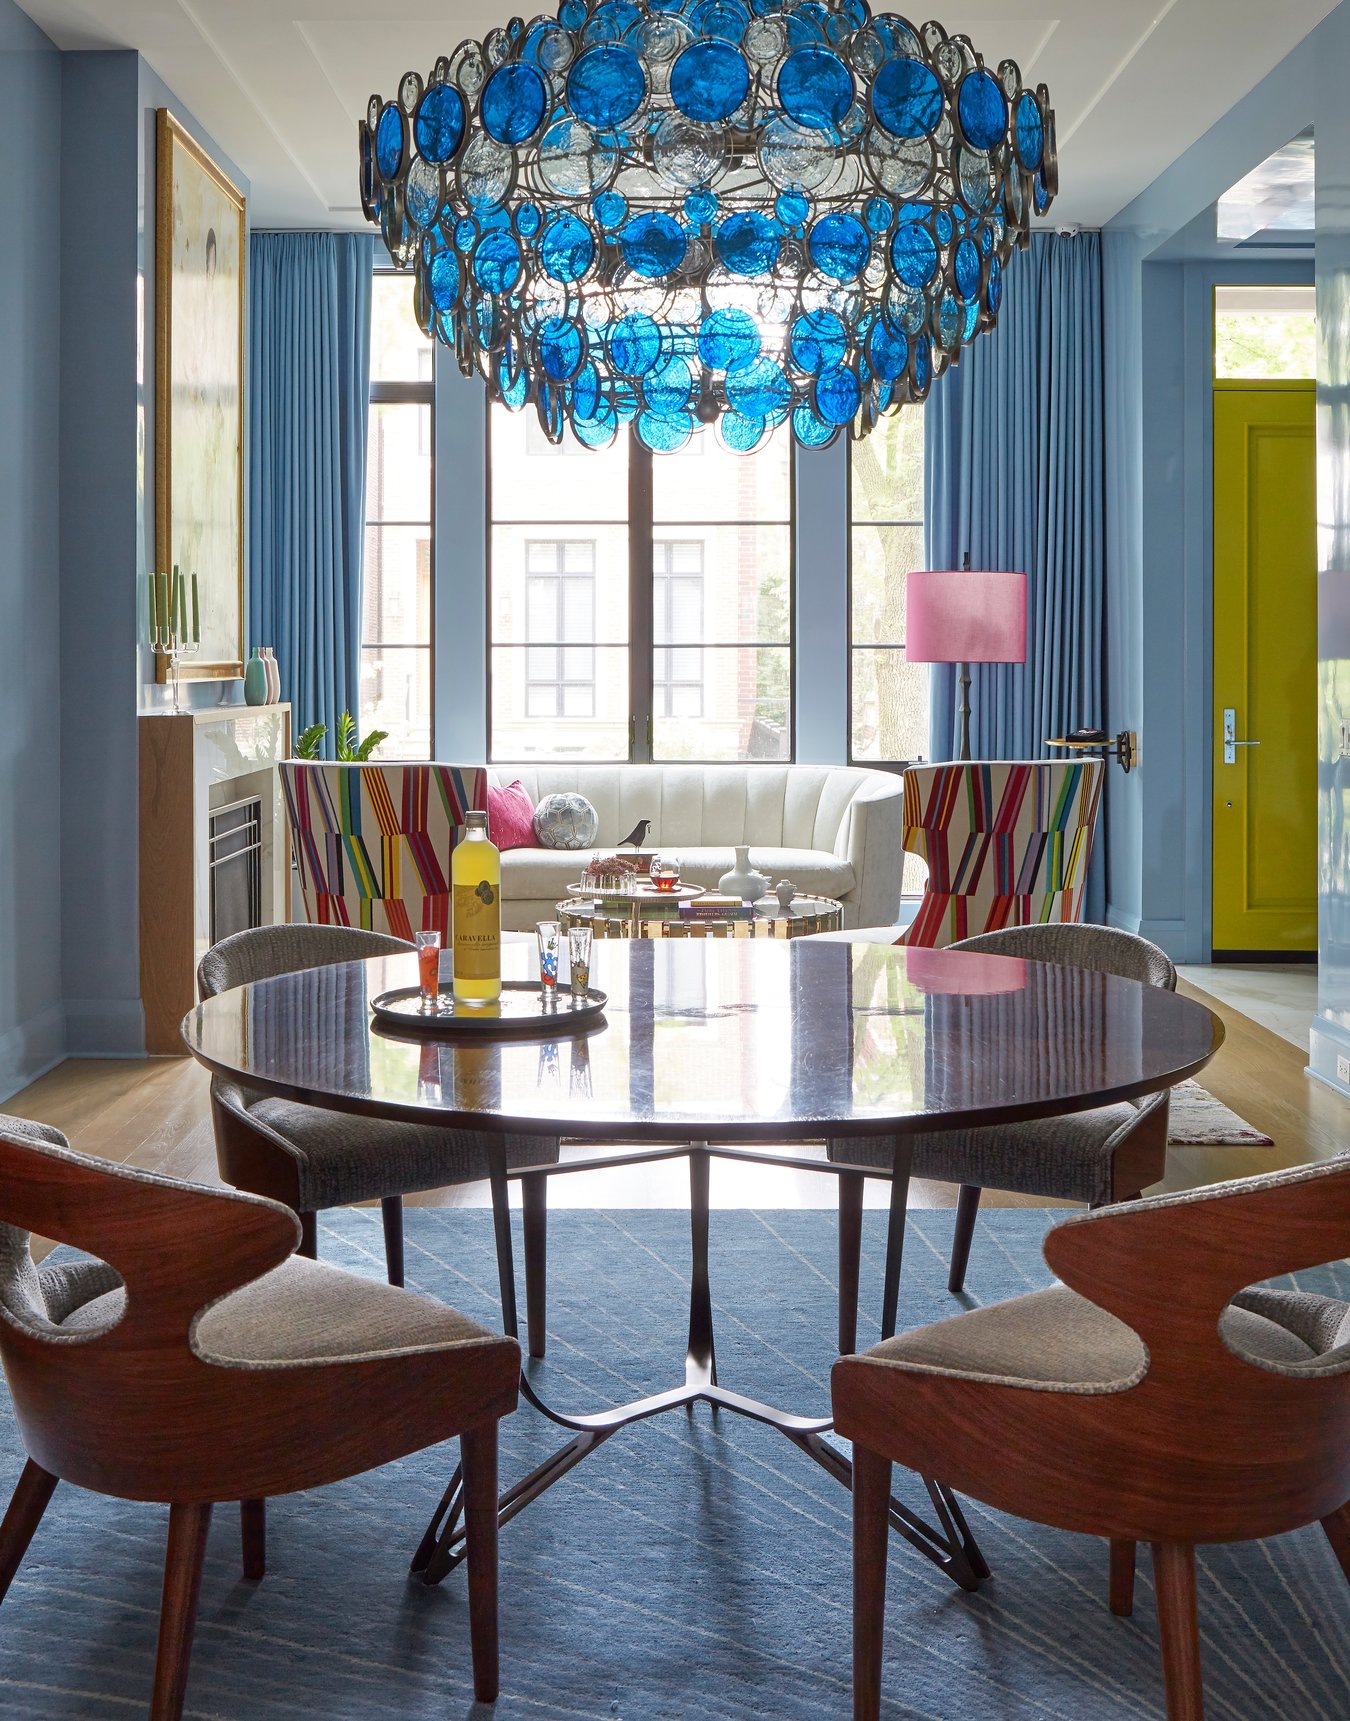 A blue and white glass chandelier in a living room with bright natural light and blue drapes designed by Jasmin Reese Interiors, Chicago, USA. 